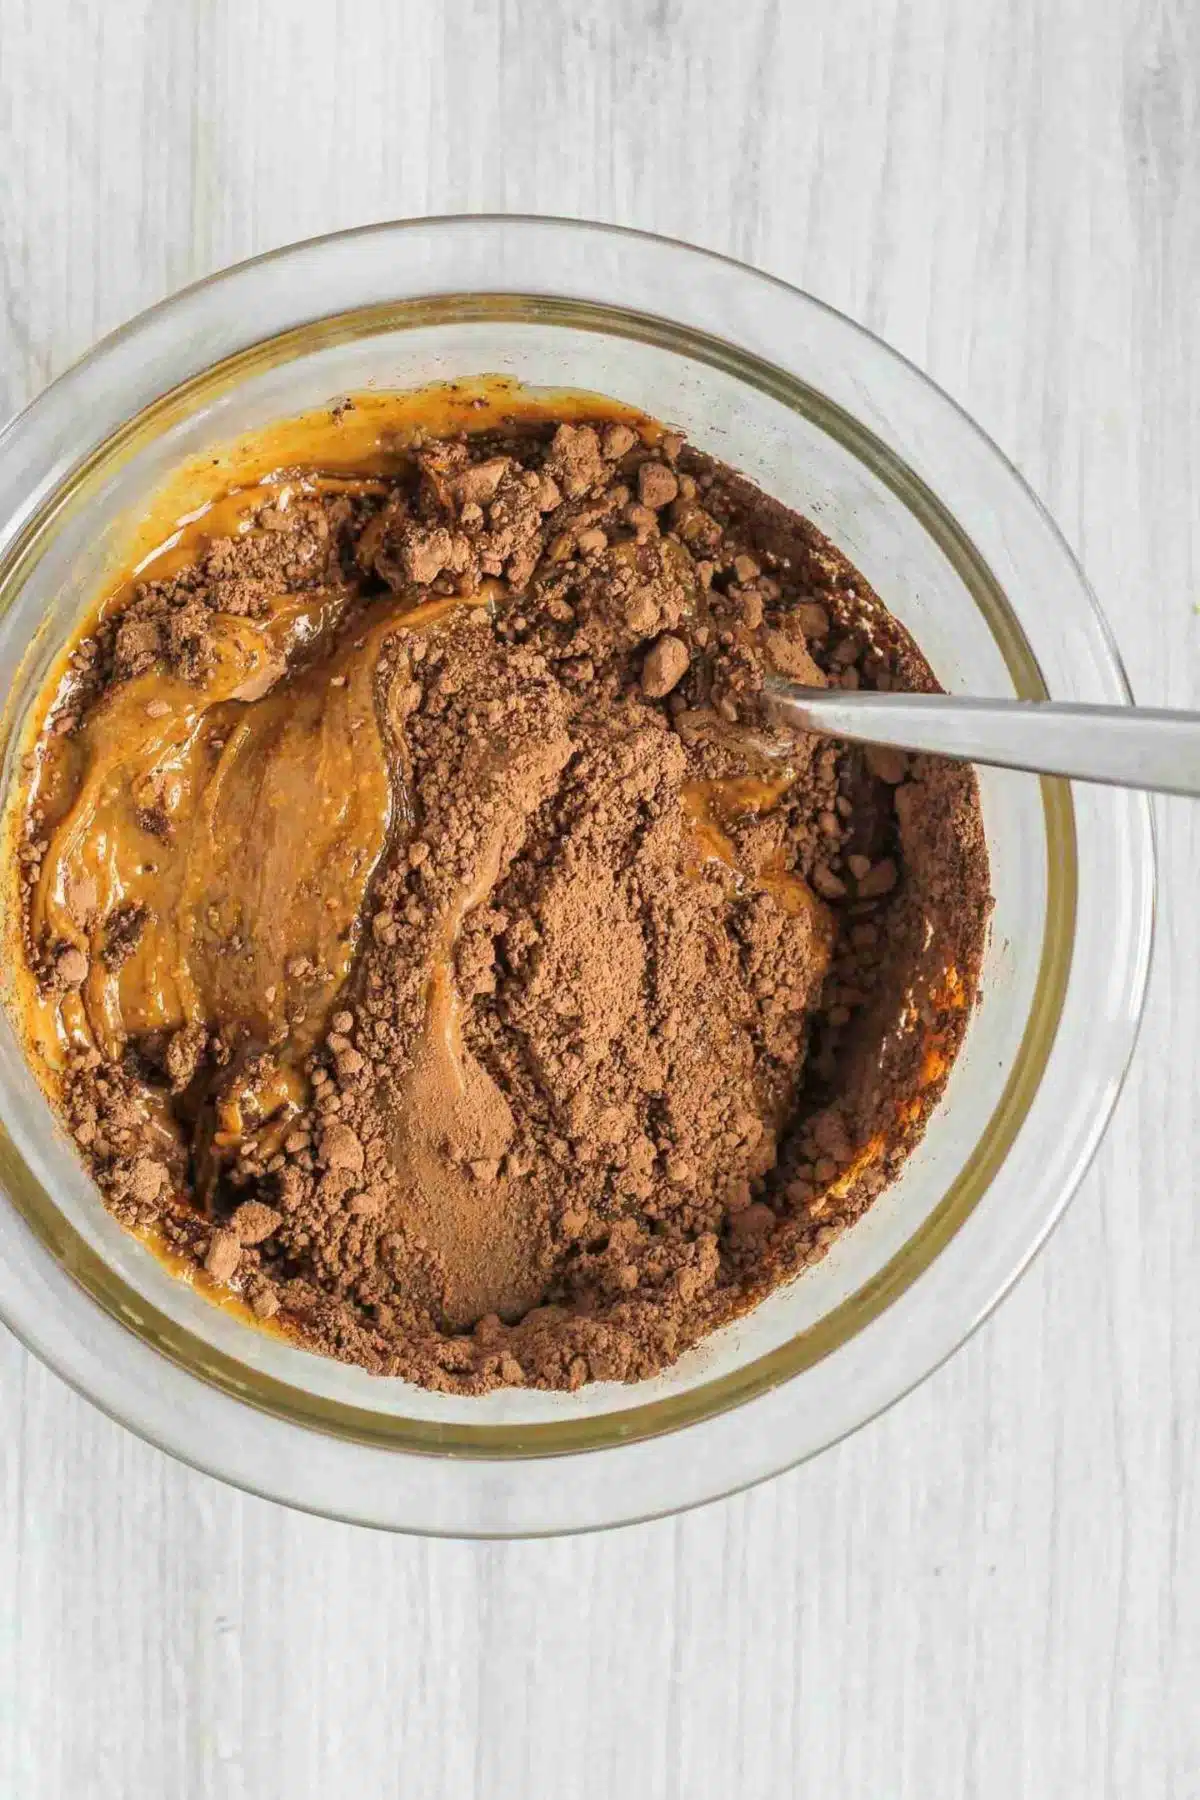 Peanut butter, honey, and cacao being mixed together in a glass mixing bowl.